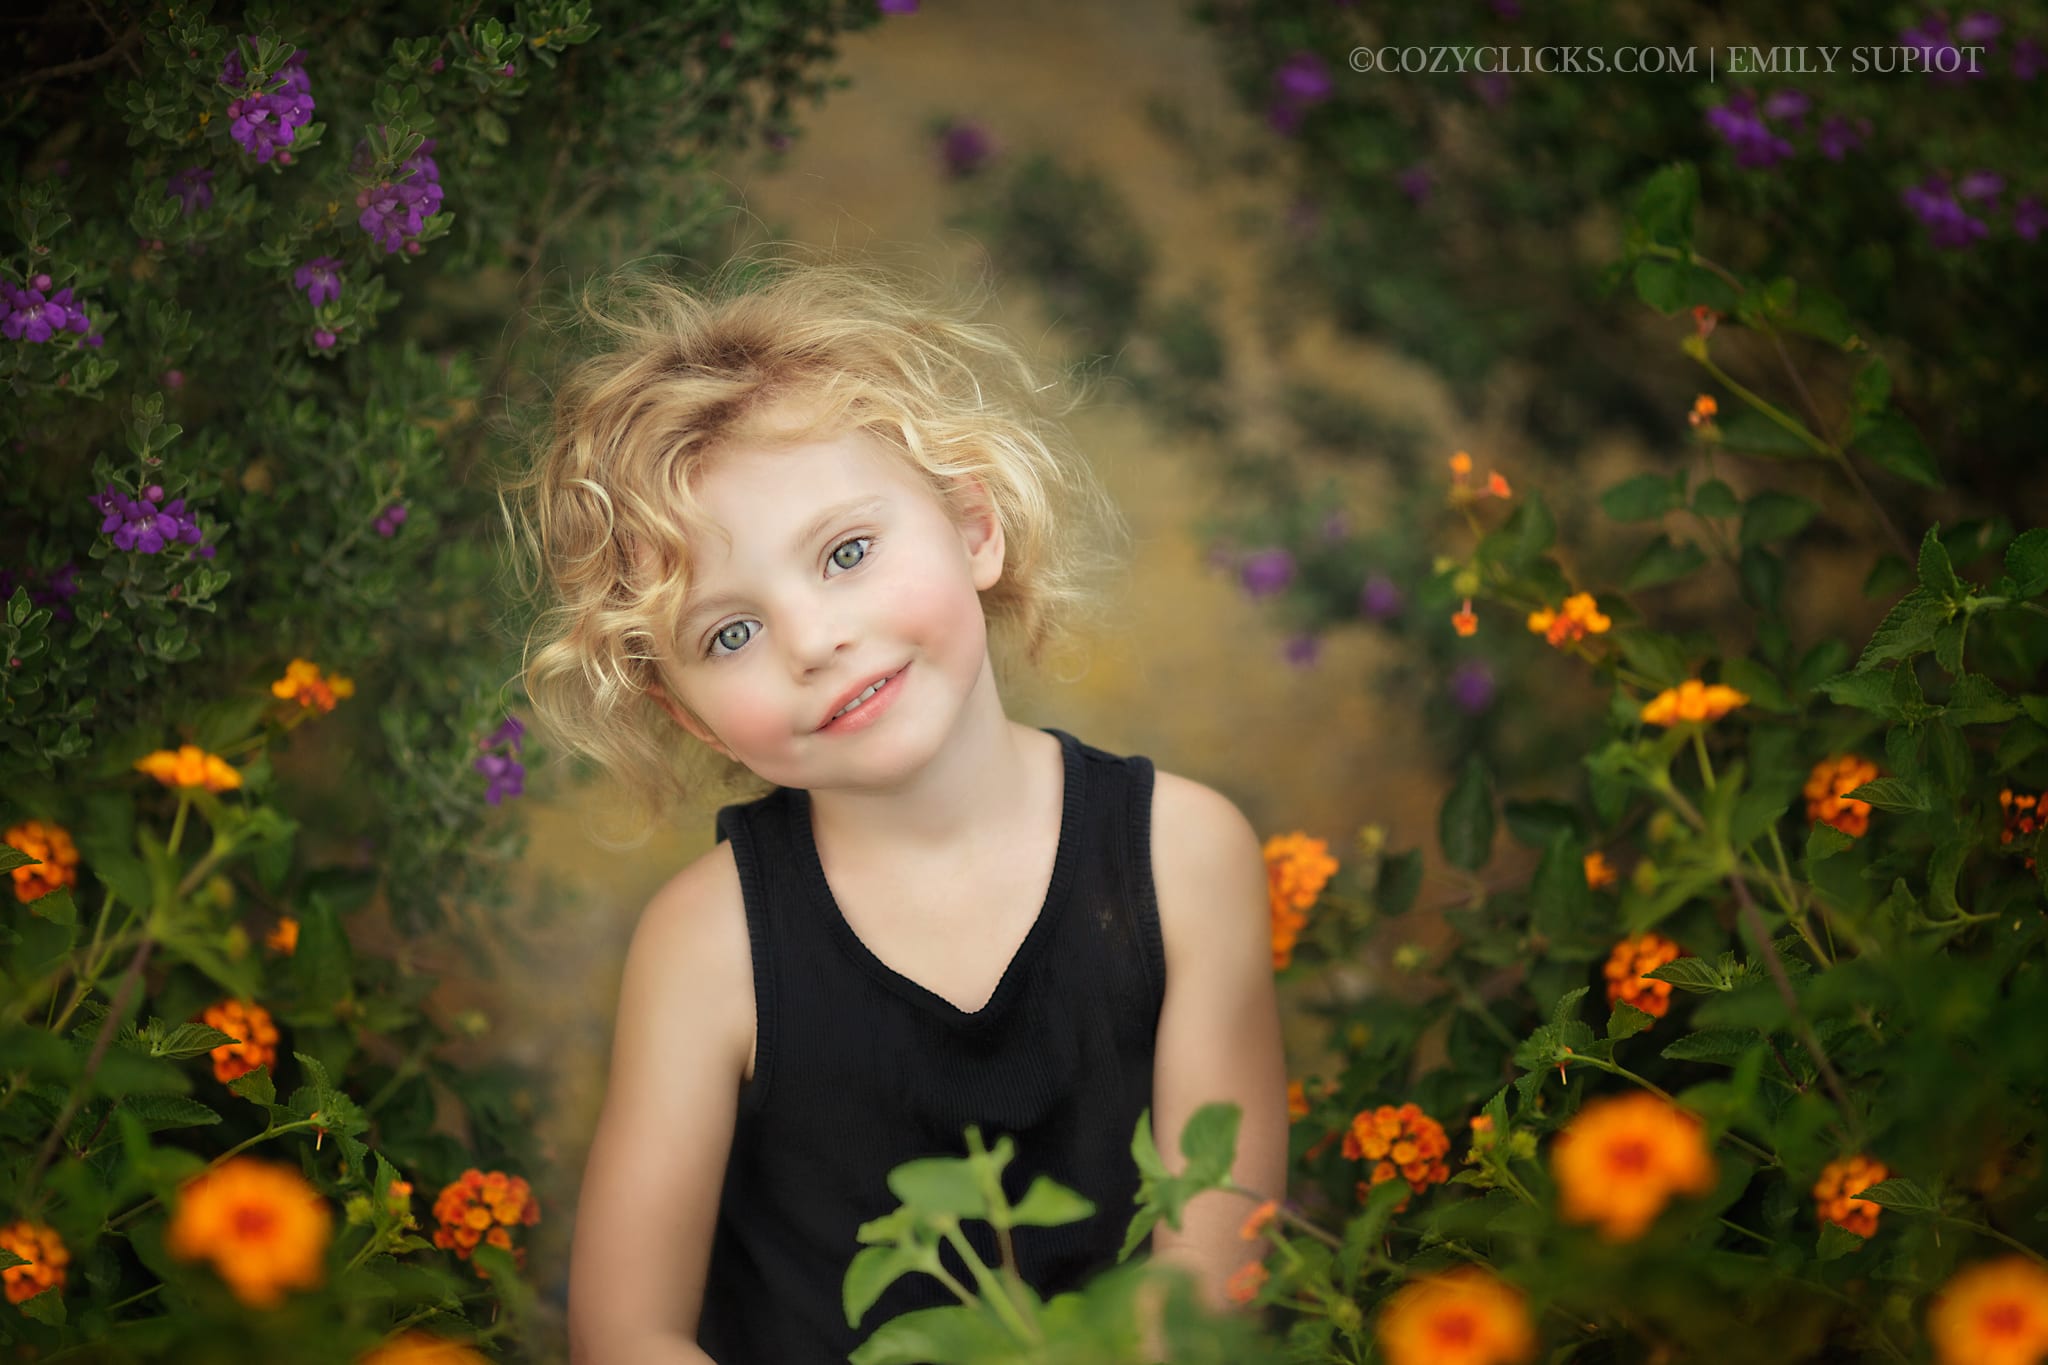 Young girl sitting in a field of orange and purple springtime flowers in the desert